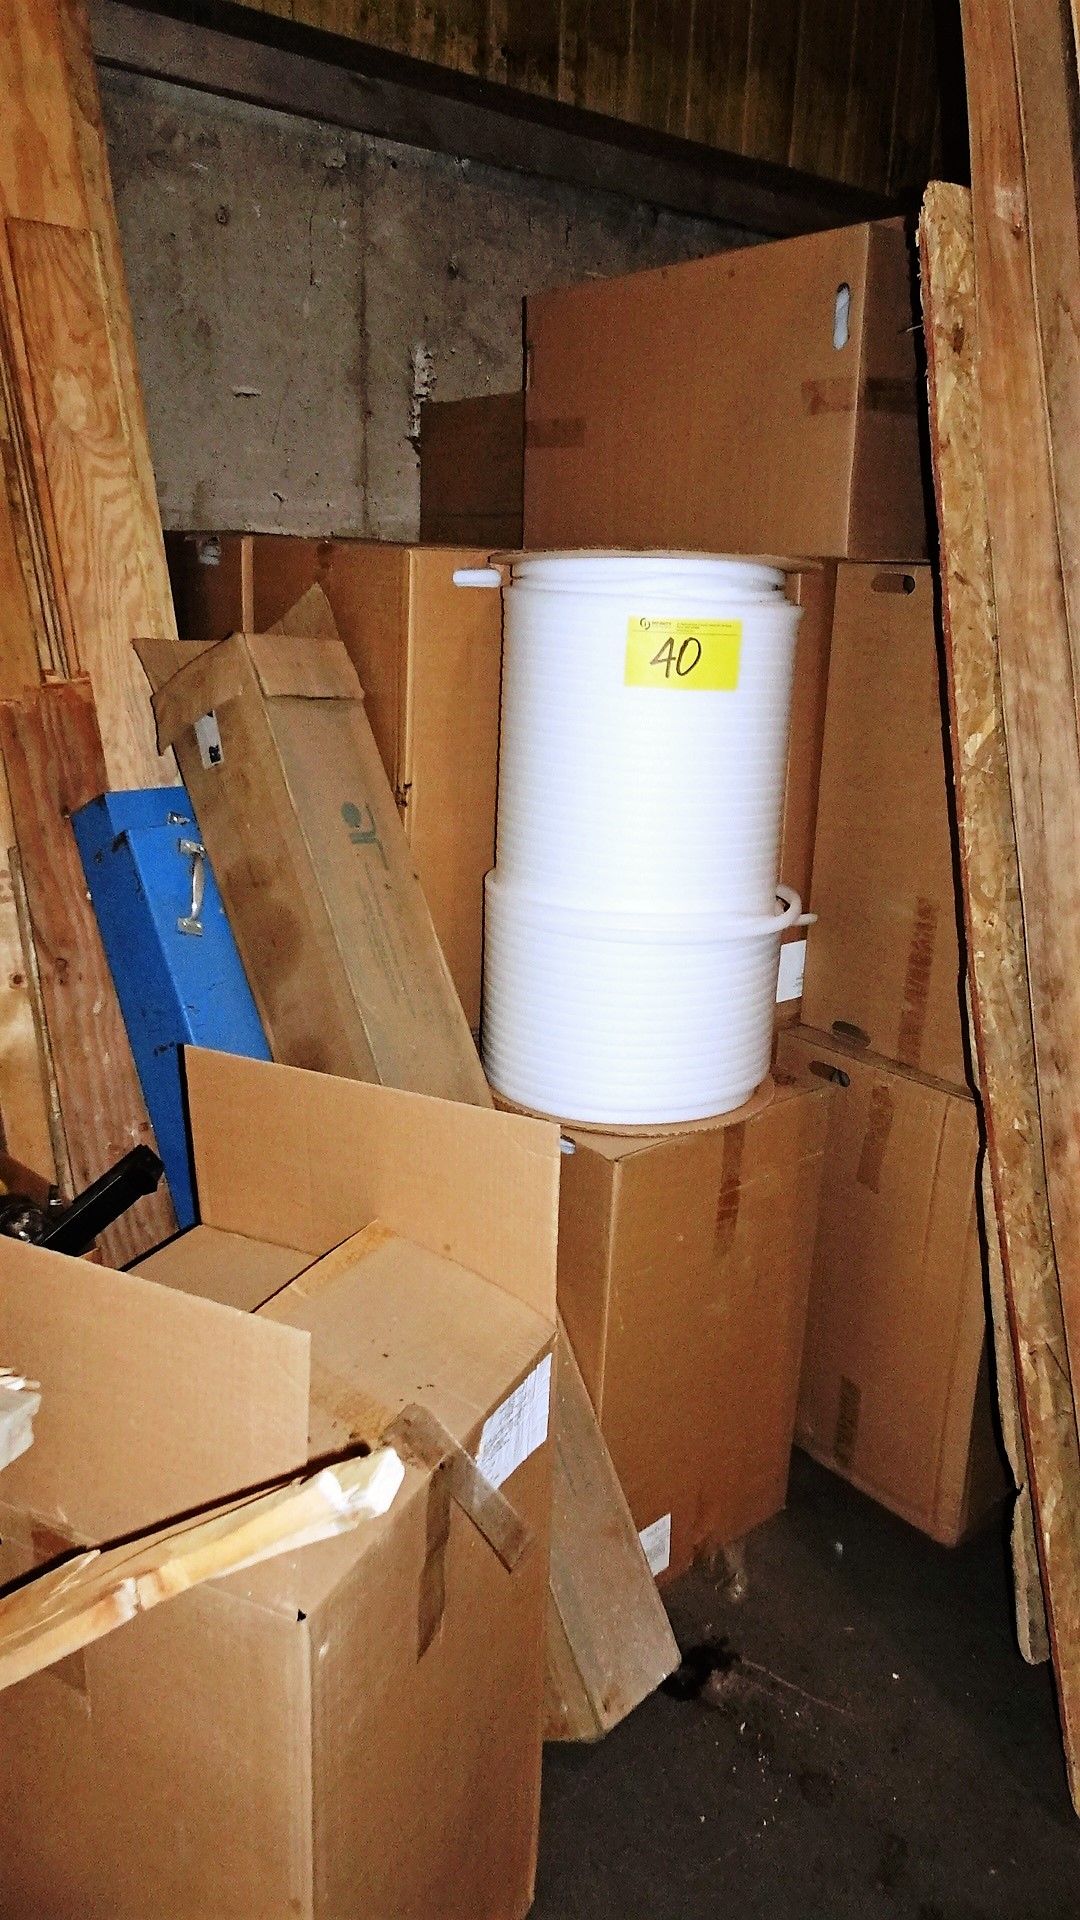 Assorted Product Consisting Of: Panels, Trays, Wood, Metal Storage Bin, Boxes of Insulation etc. - Image 5 of 8